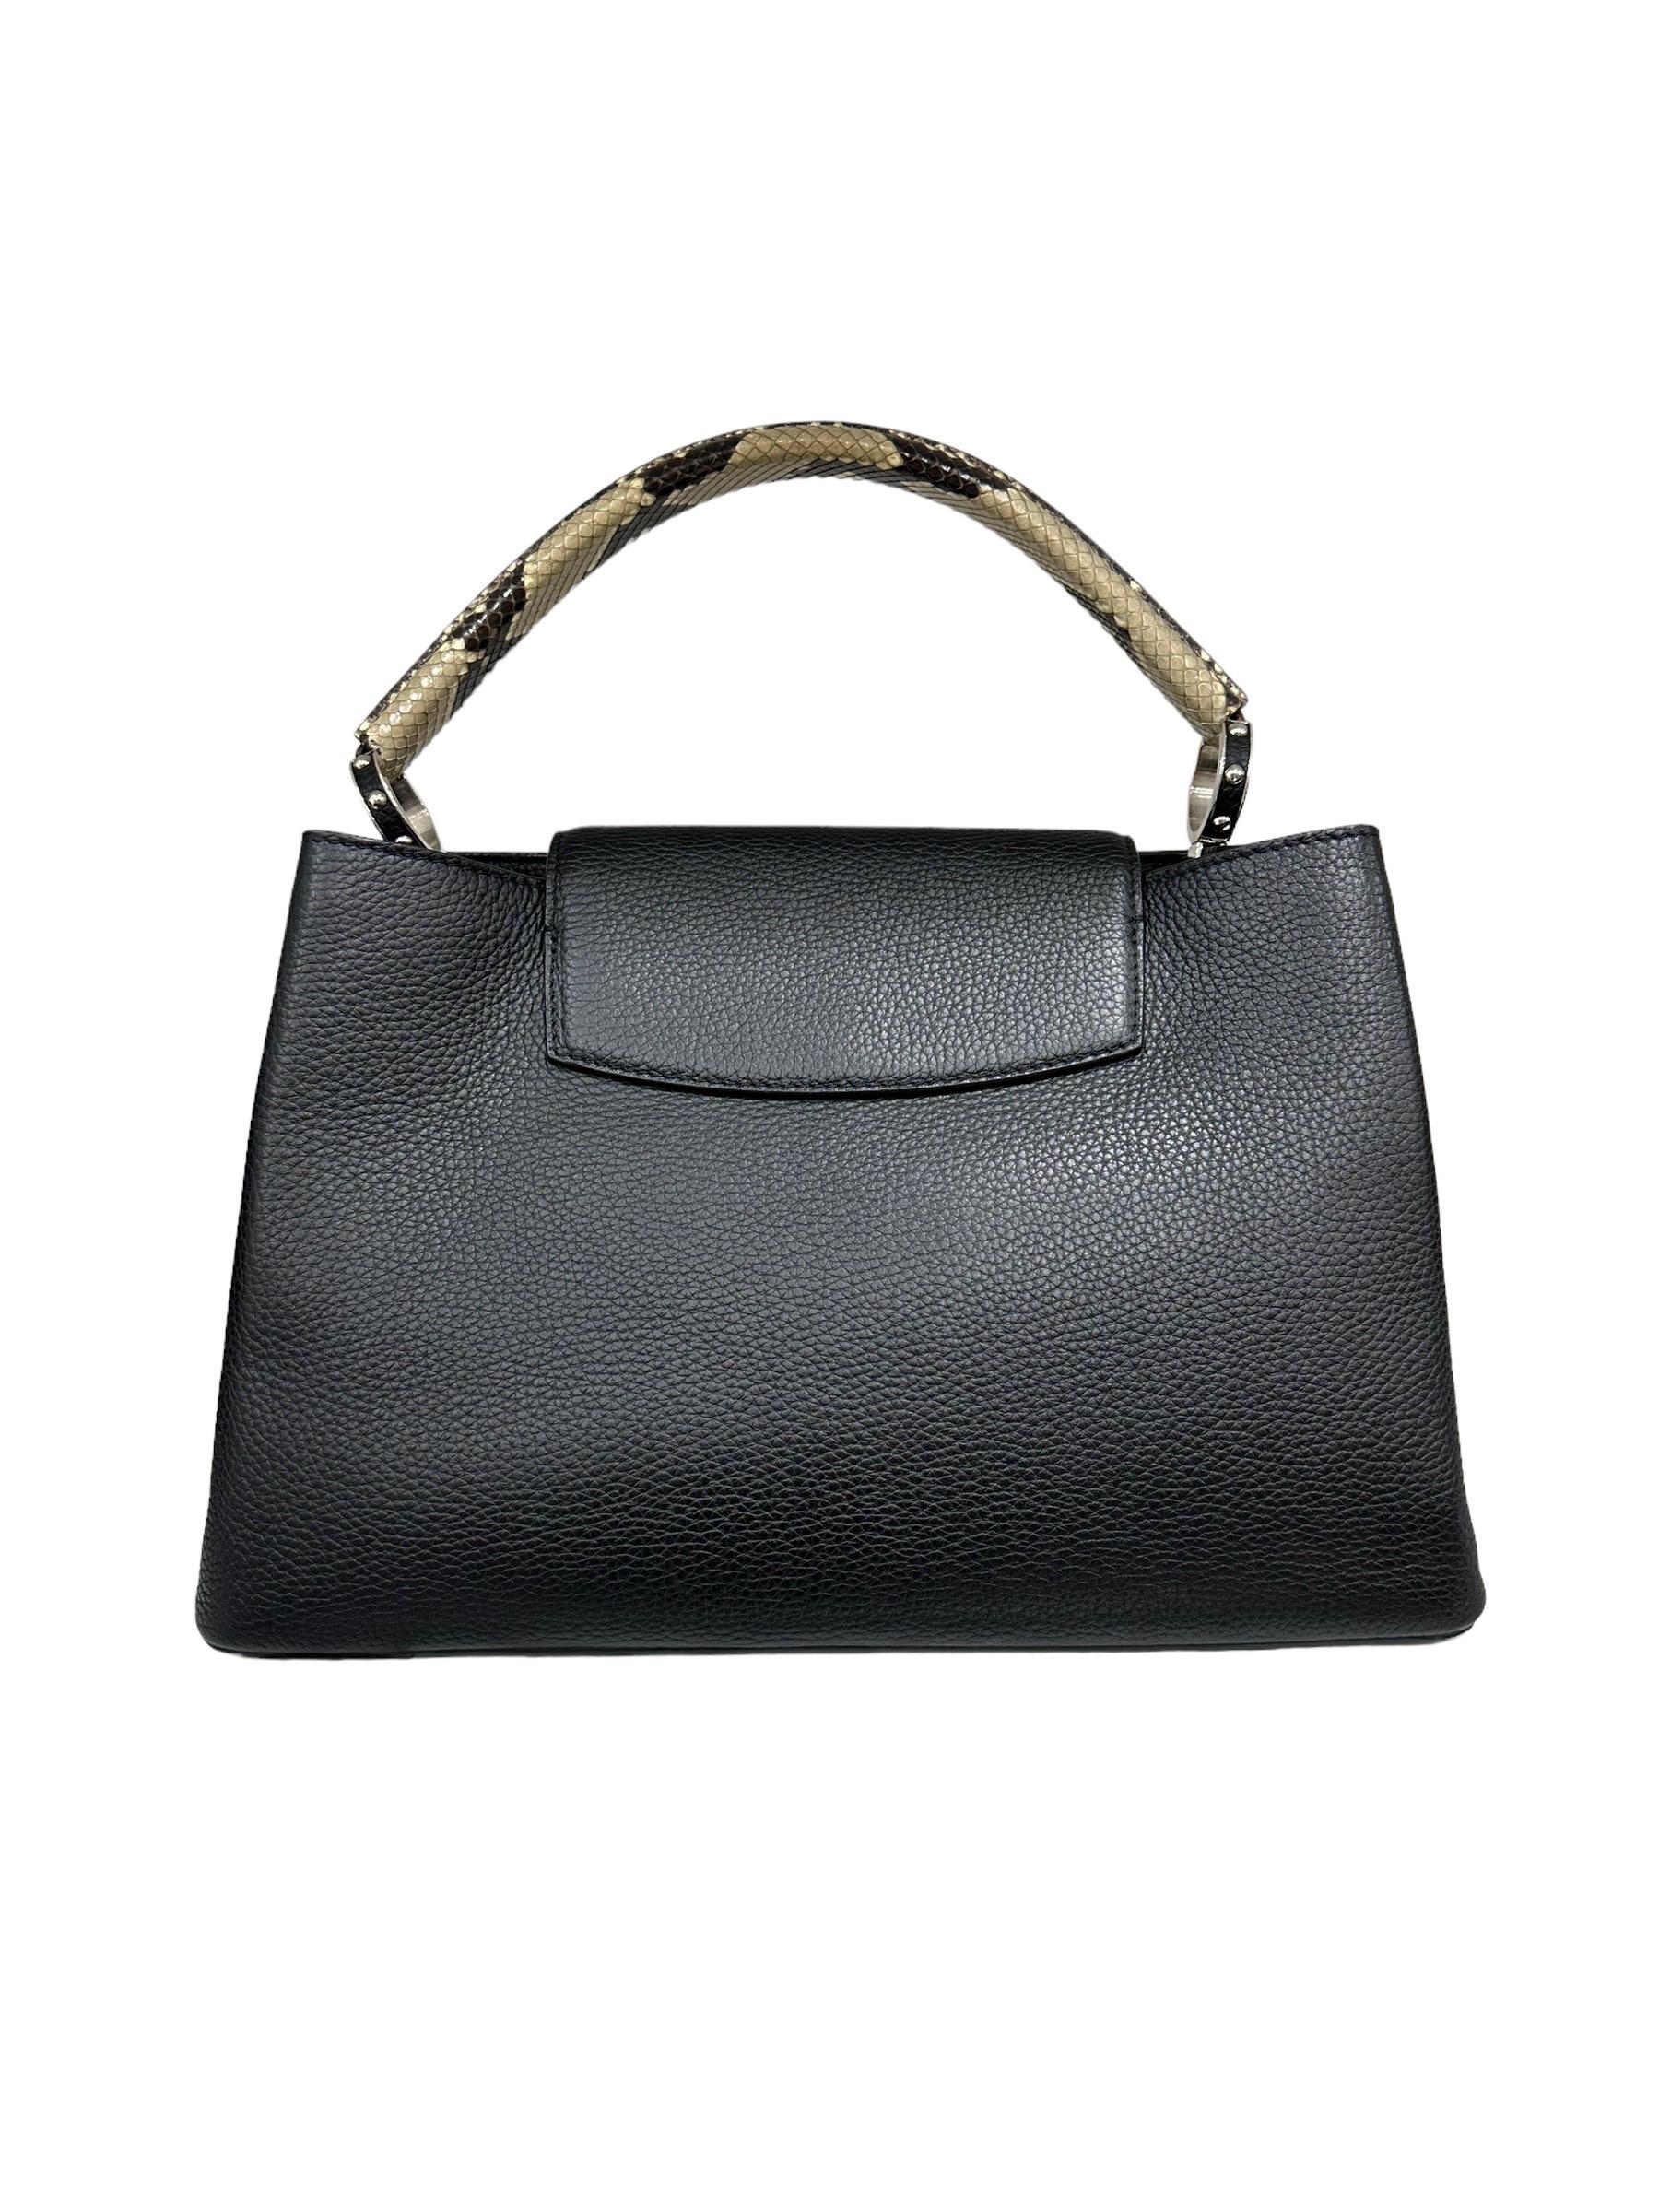 Louis Vuitton Capucines GM Top Handle Bag Black Leather In Excellent Condition For Sale In Torre Del Greco, IT